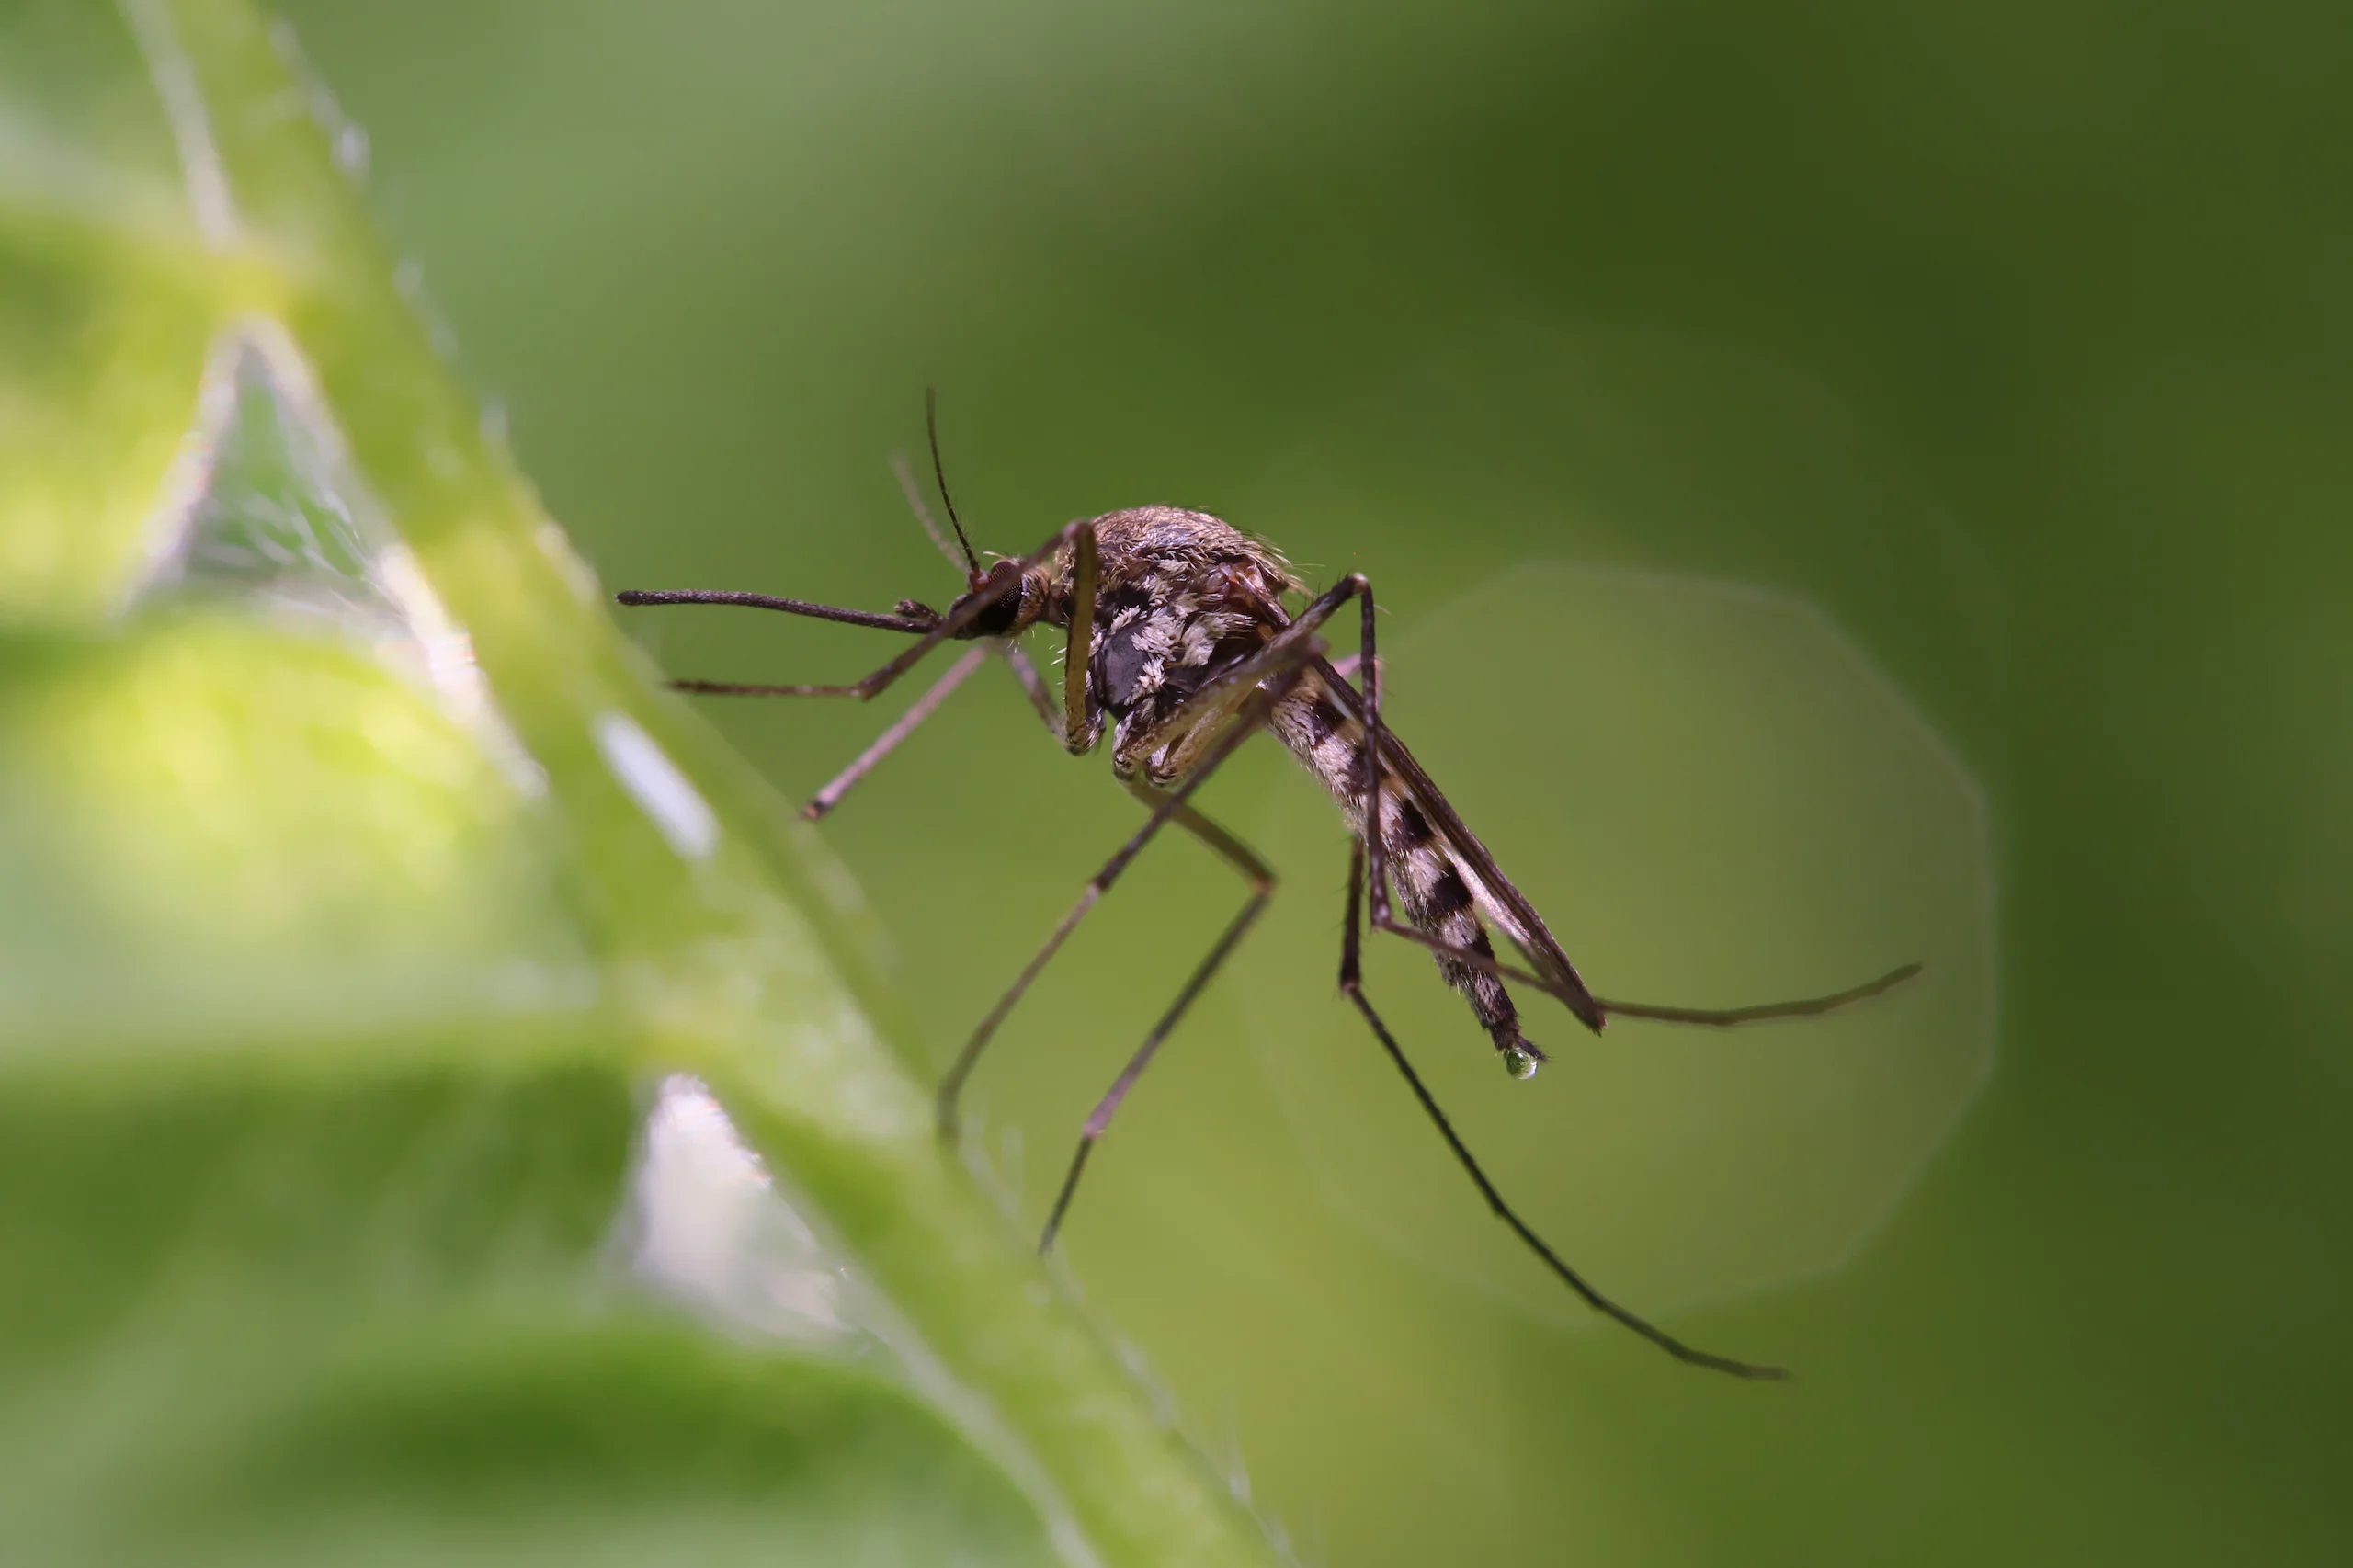 A stripped mosquito on a leaf - Keep mosquitoes away from your home with Florida Pest Control in Gainesville FL